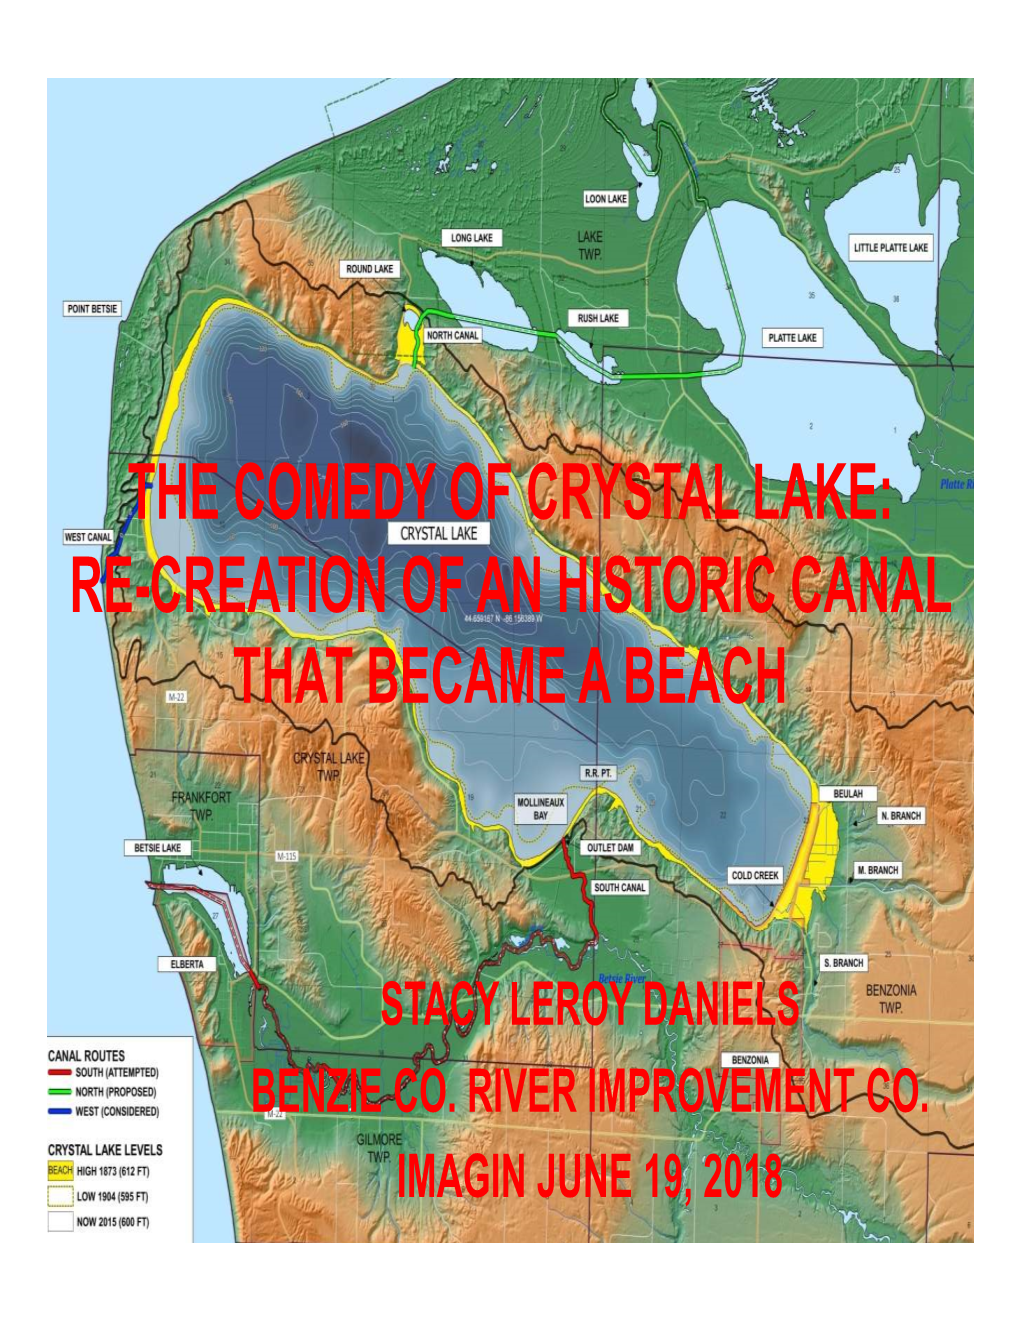 The Comedy of Crystal Lake: Re-Creation of an Historic Canal That Became a Beach